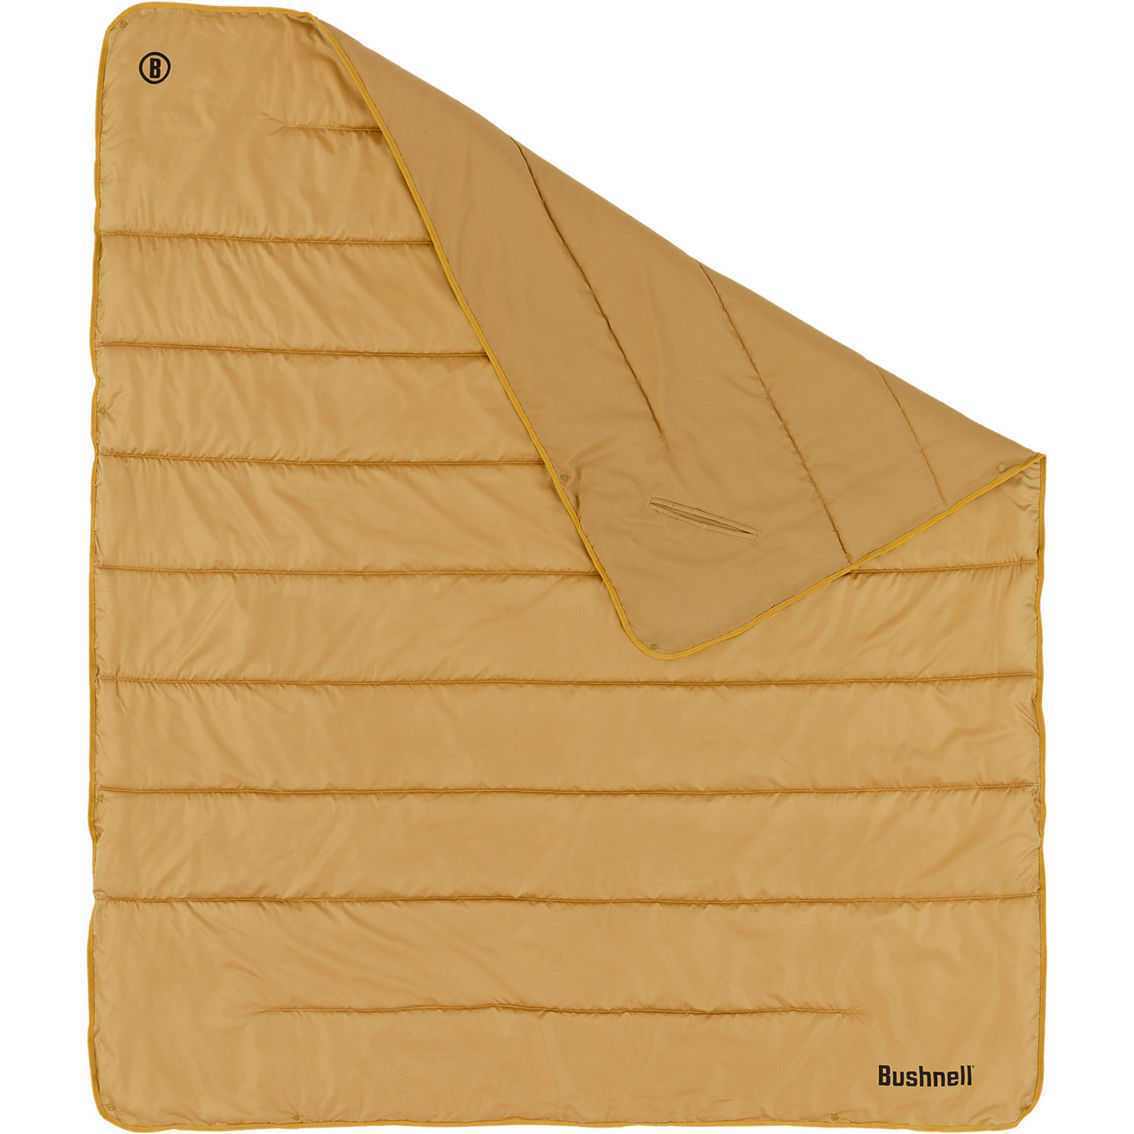 Bushnell Insulated Wearable Blanket - Image 4 of 7